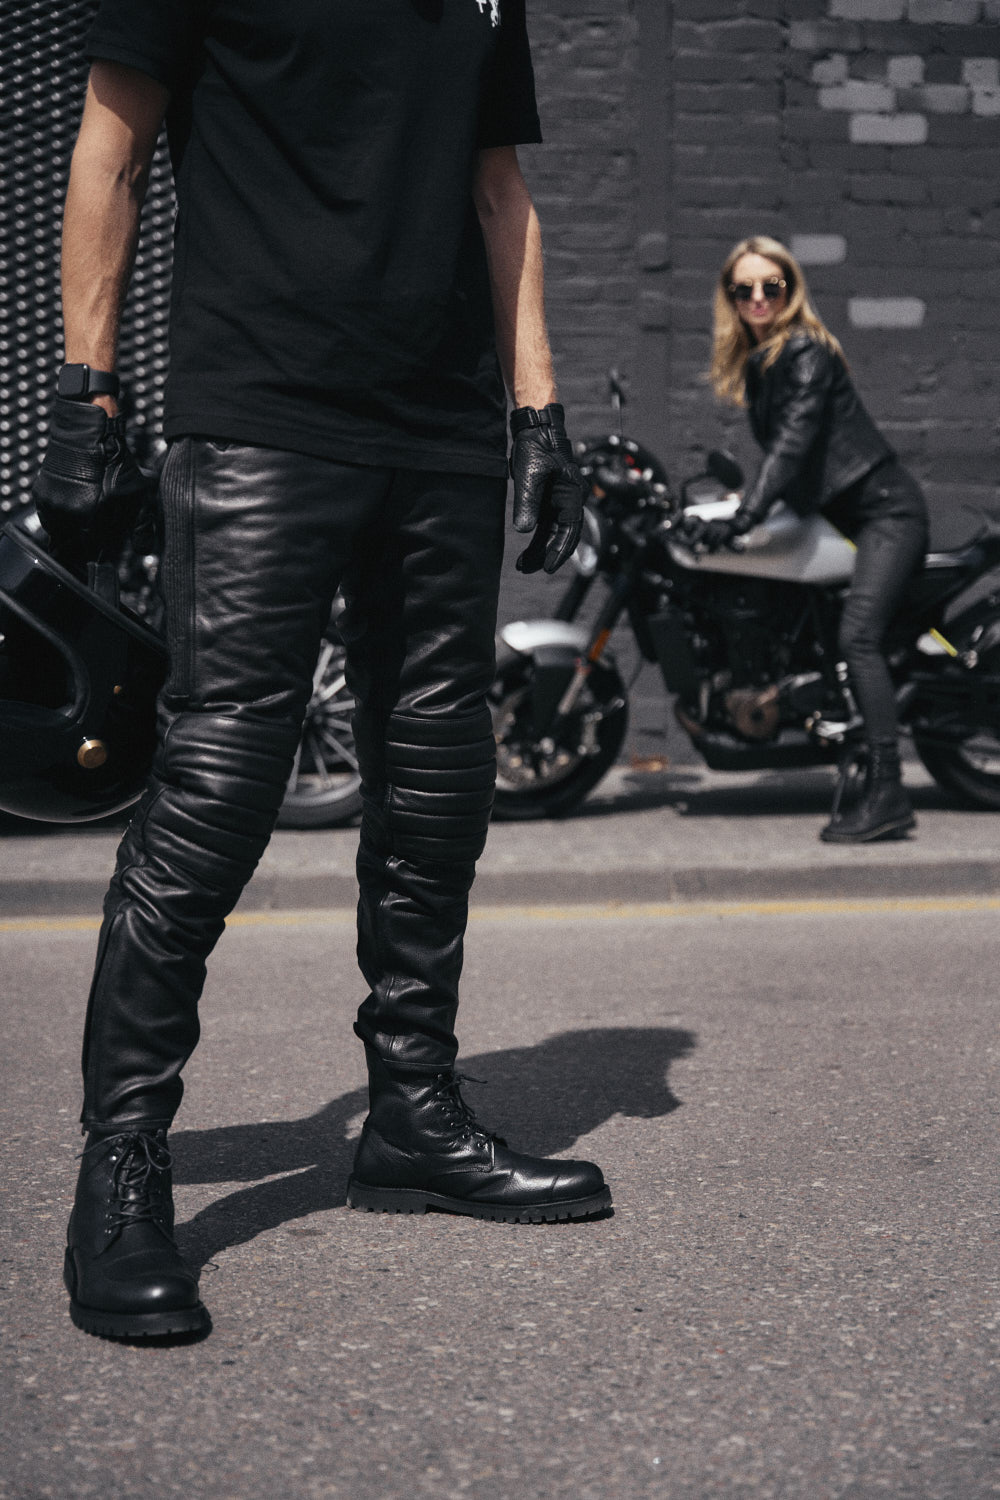 Wholesale Mens Skinny Faux Leather Motorcycle Pants Black Slim Fit Biker  Faux Leather Trousers In Sizes 27 36 From Manxinxin, $38.65